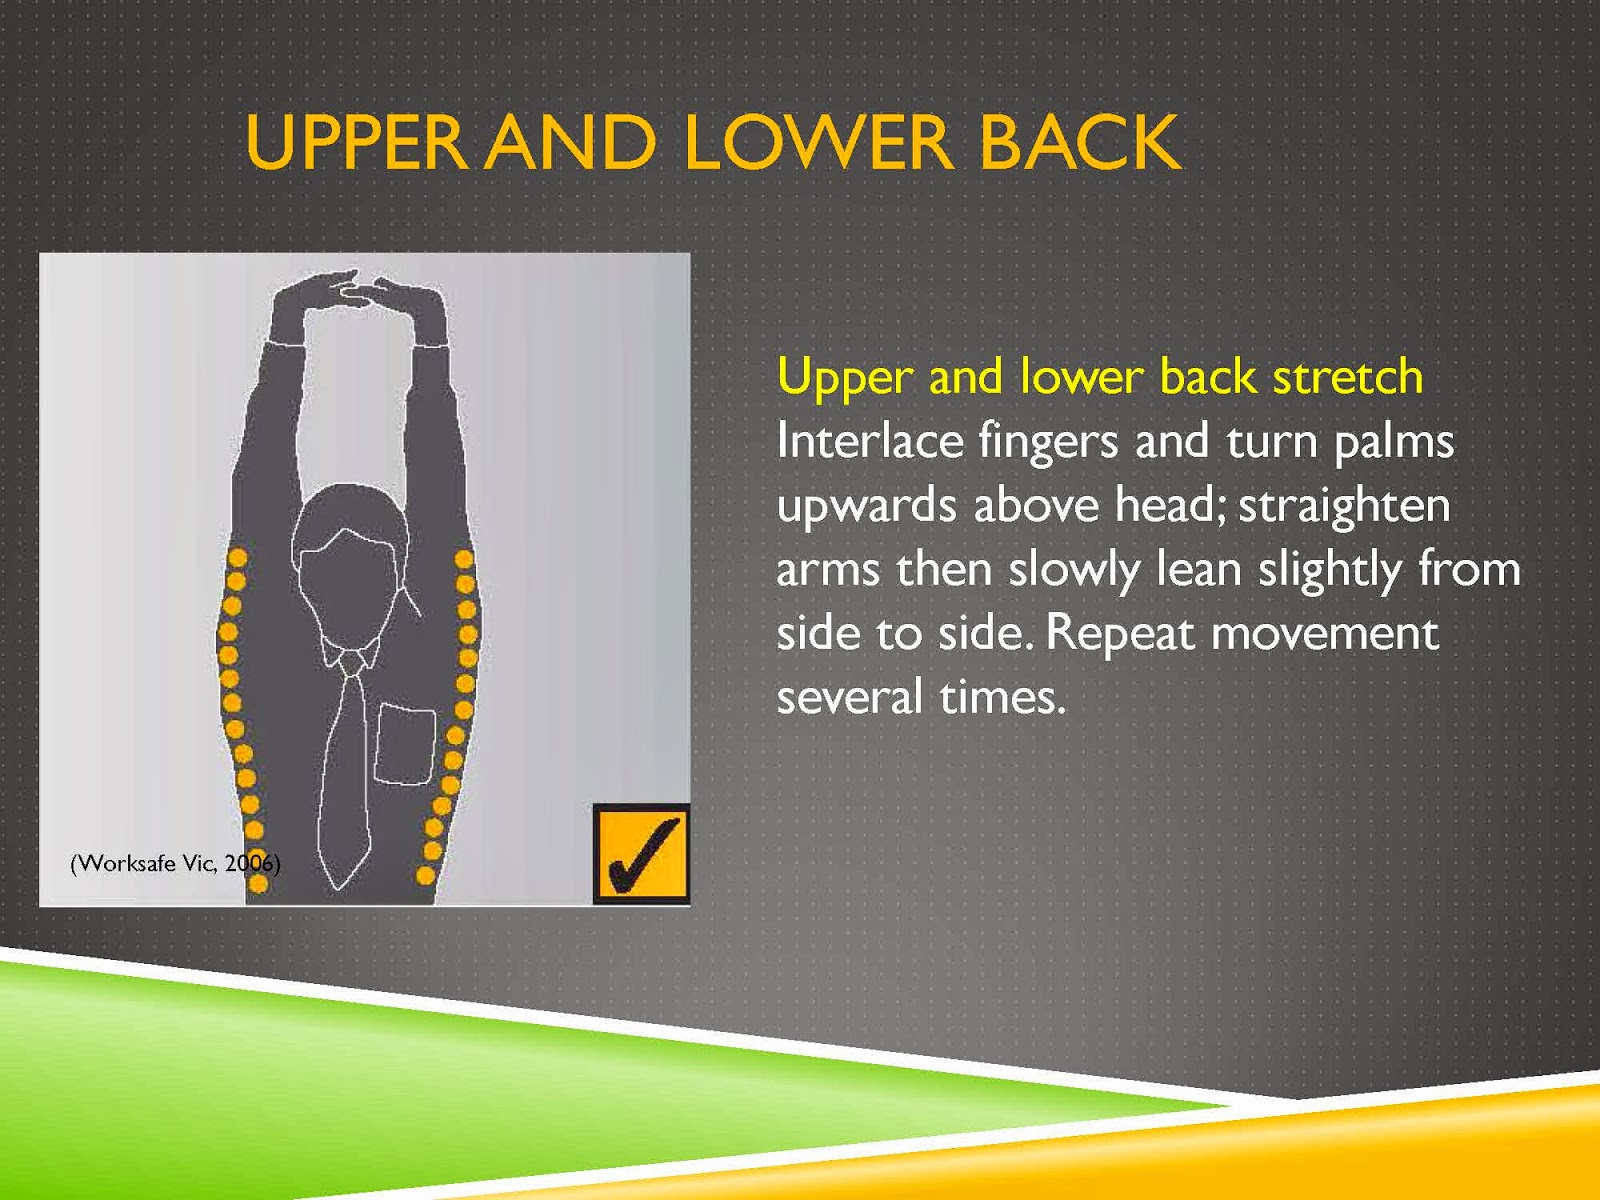 UPPER AND LOWER BACK STRETCH